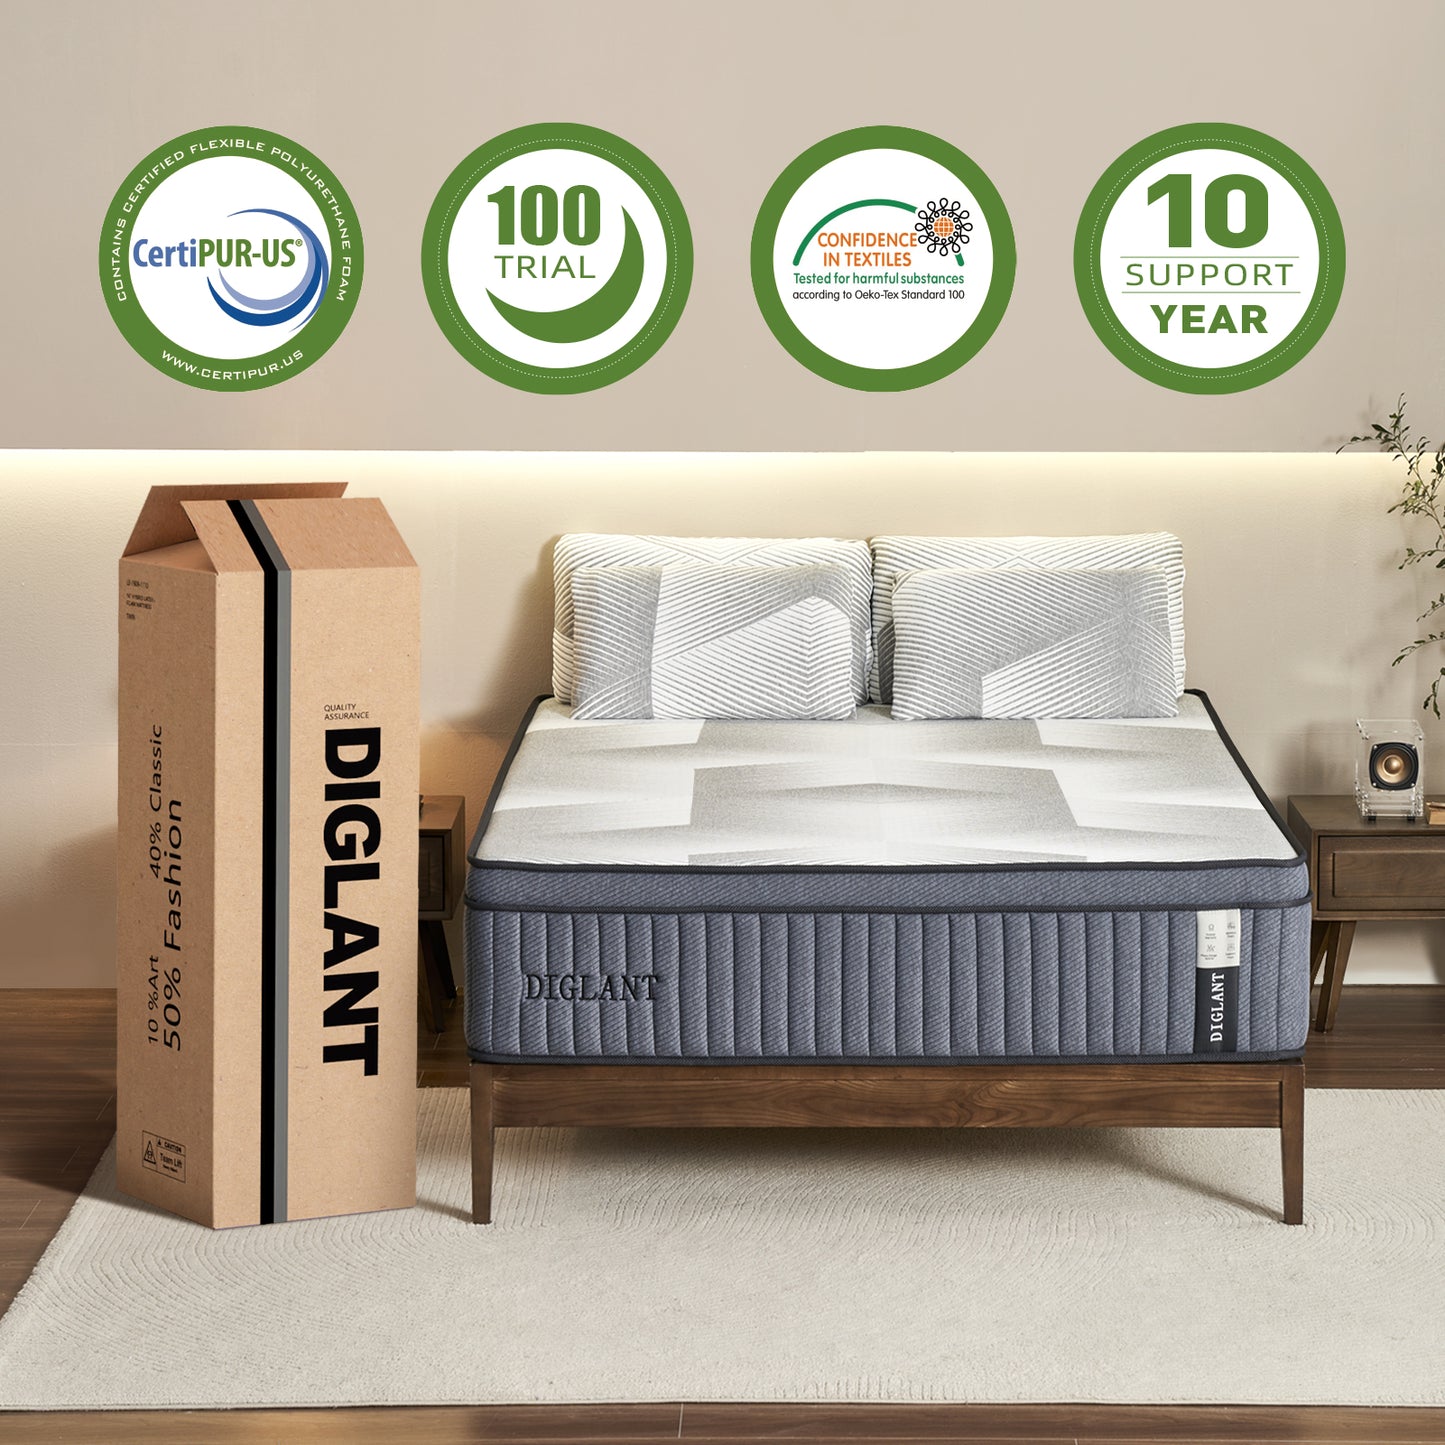 DIGLANT 14Inch Comfort MDI Memory Foam Hybrid Mattress with Individual Pocket Springs for Durable Support & Pressure Relief, Queen Size Mattress Bed in Box, CertiPUR-US Certified